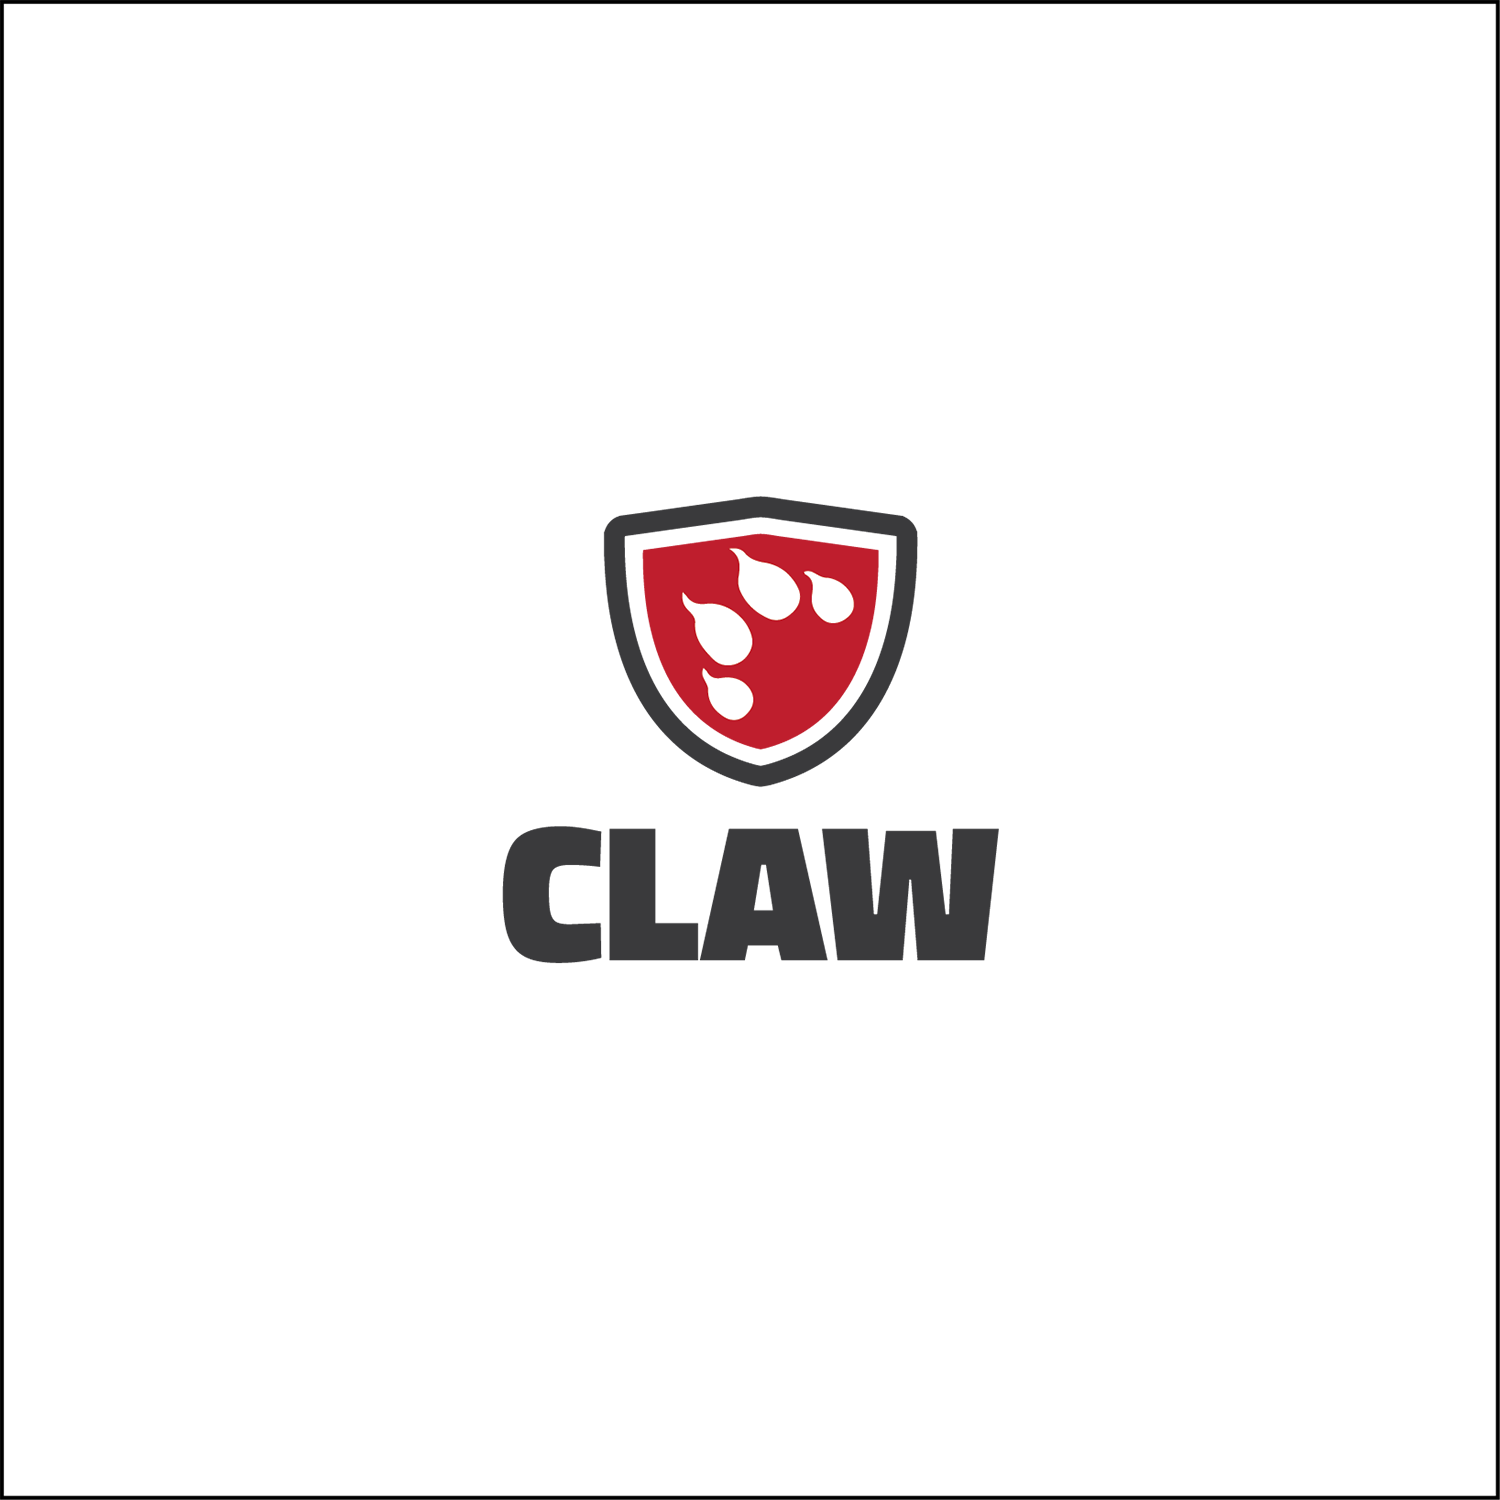 Claw Logo - Professional, Masculine Logo Design for The logo can have the name ...